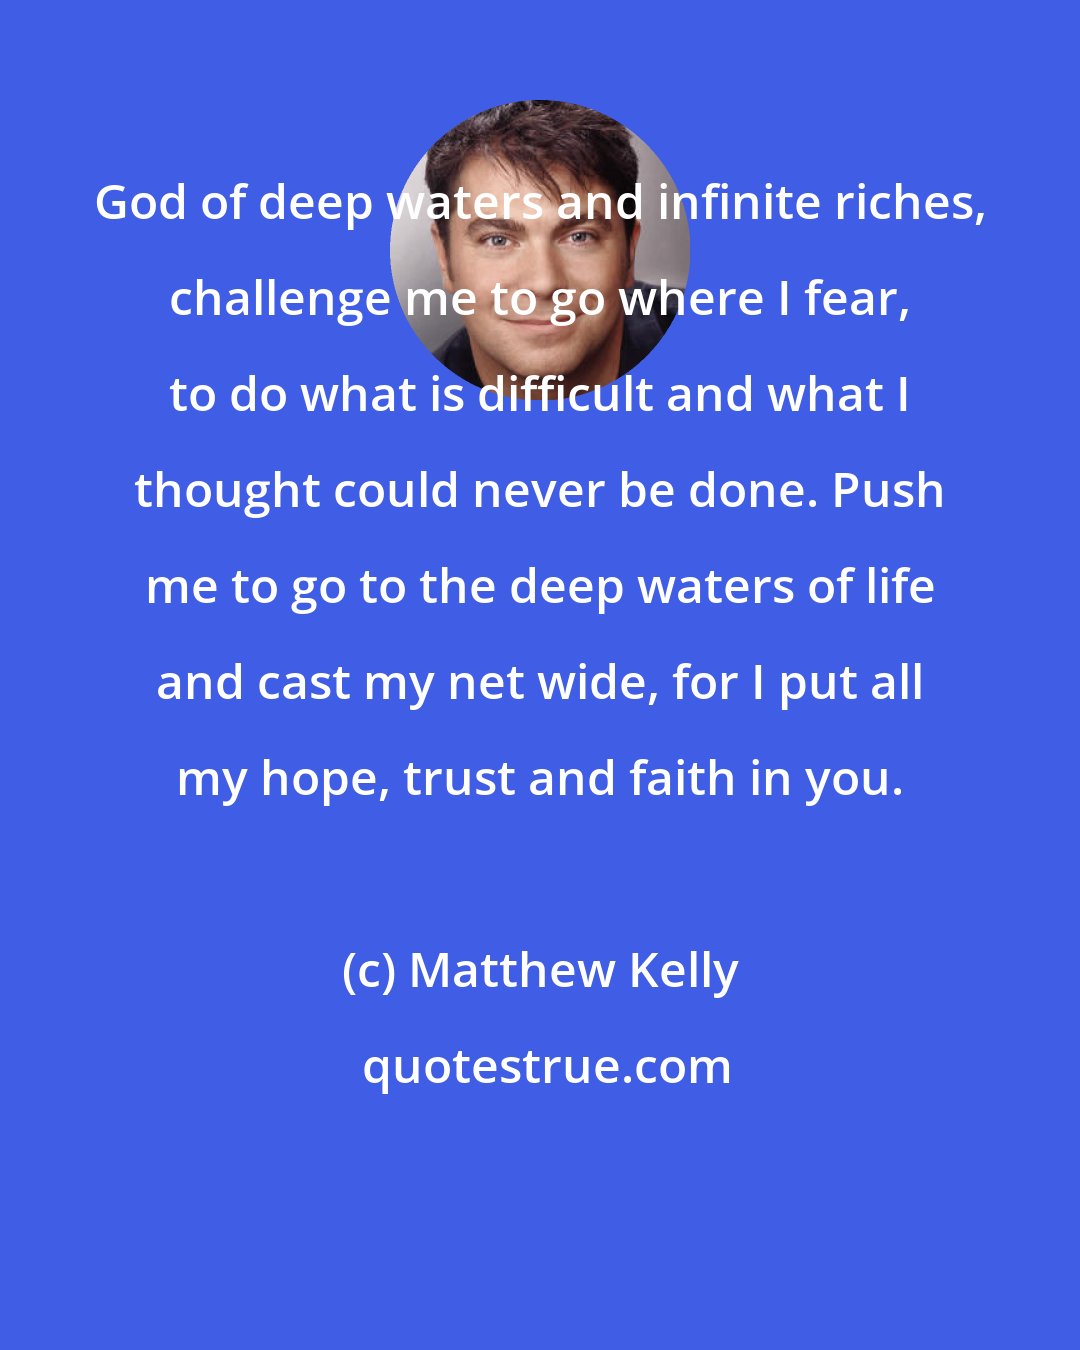 Matthew Kelly: God of deep waters and infinite riches, challenge me to go where I fear, to do what is difficult and what I thought could never be done. Push me to go to the deep waters of life and cast my net wide, for I put all my hope, trust and faith in you.